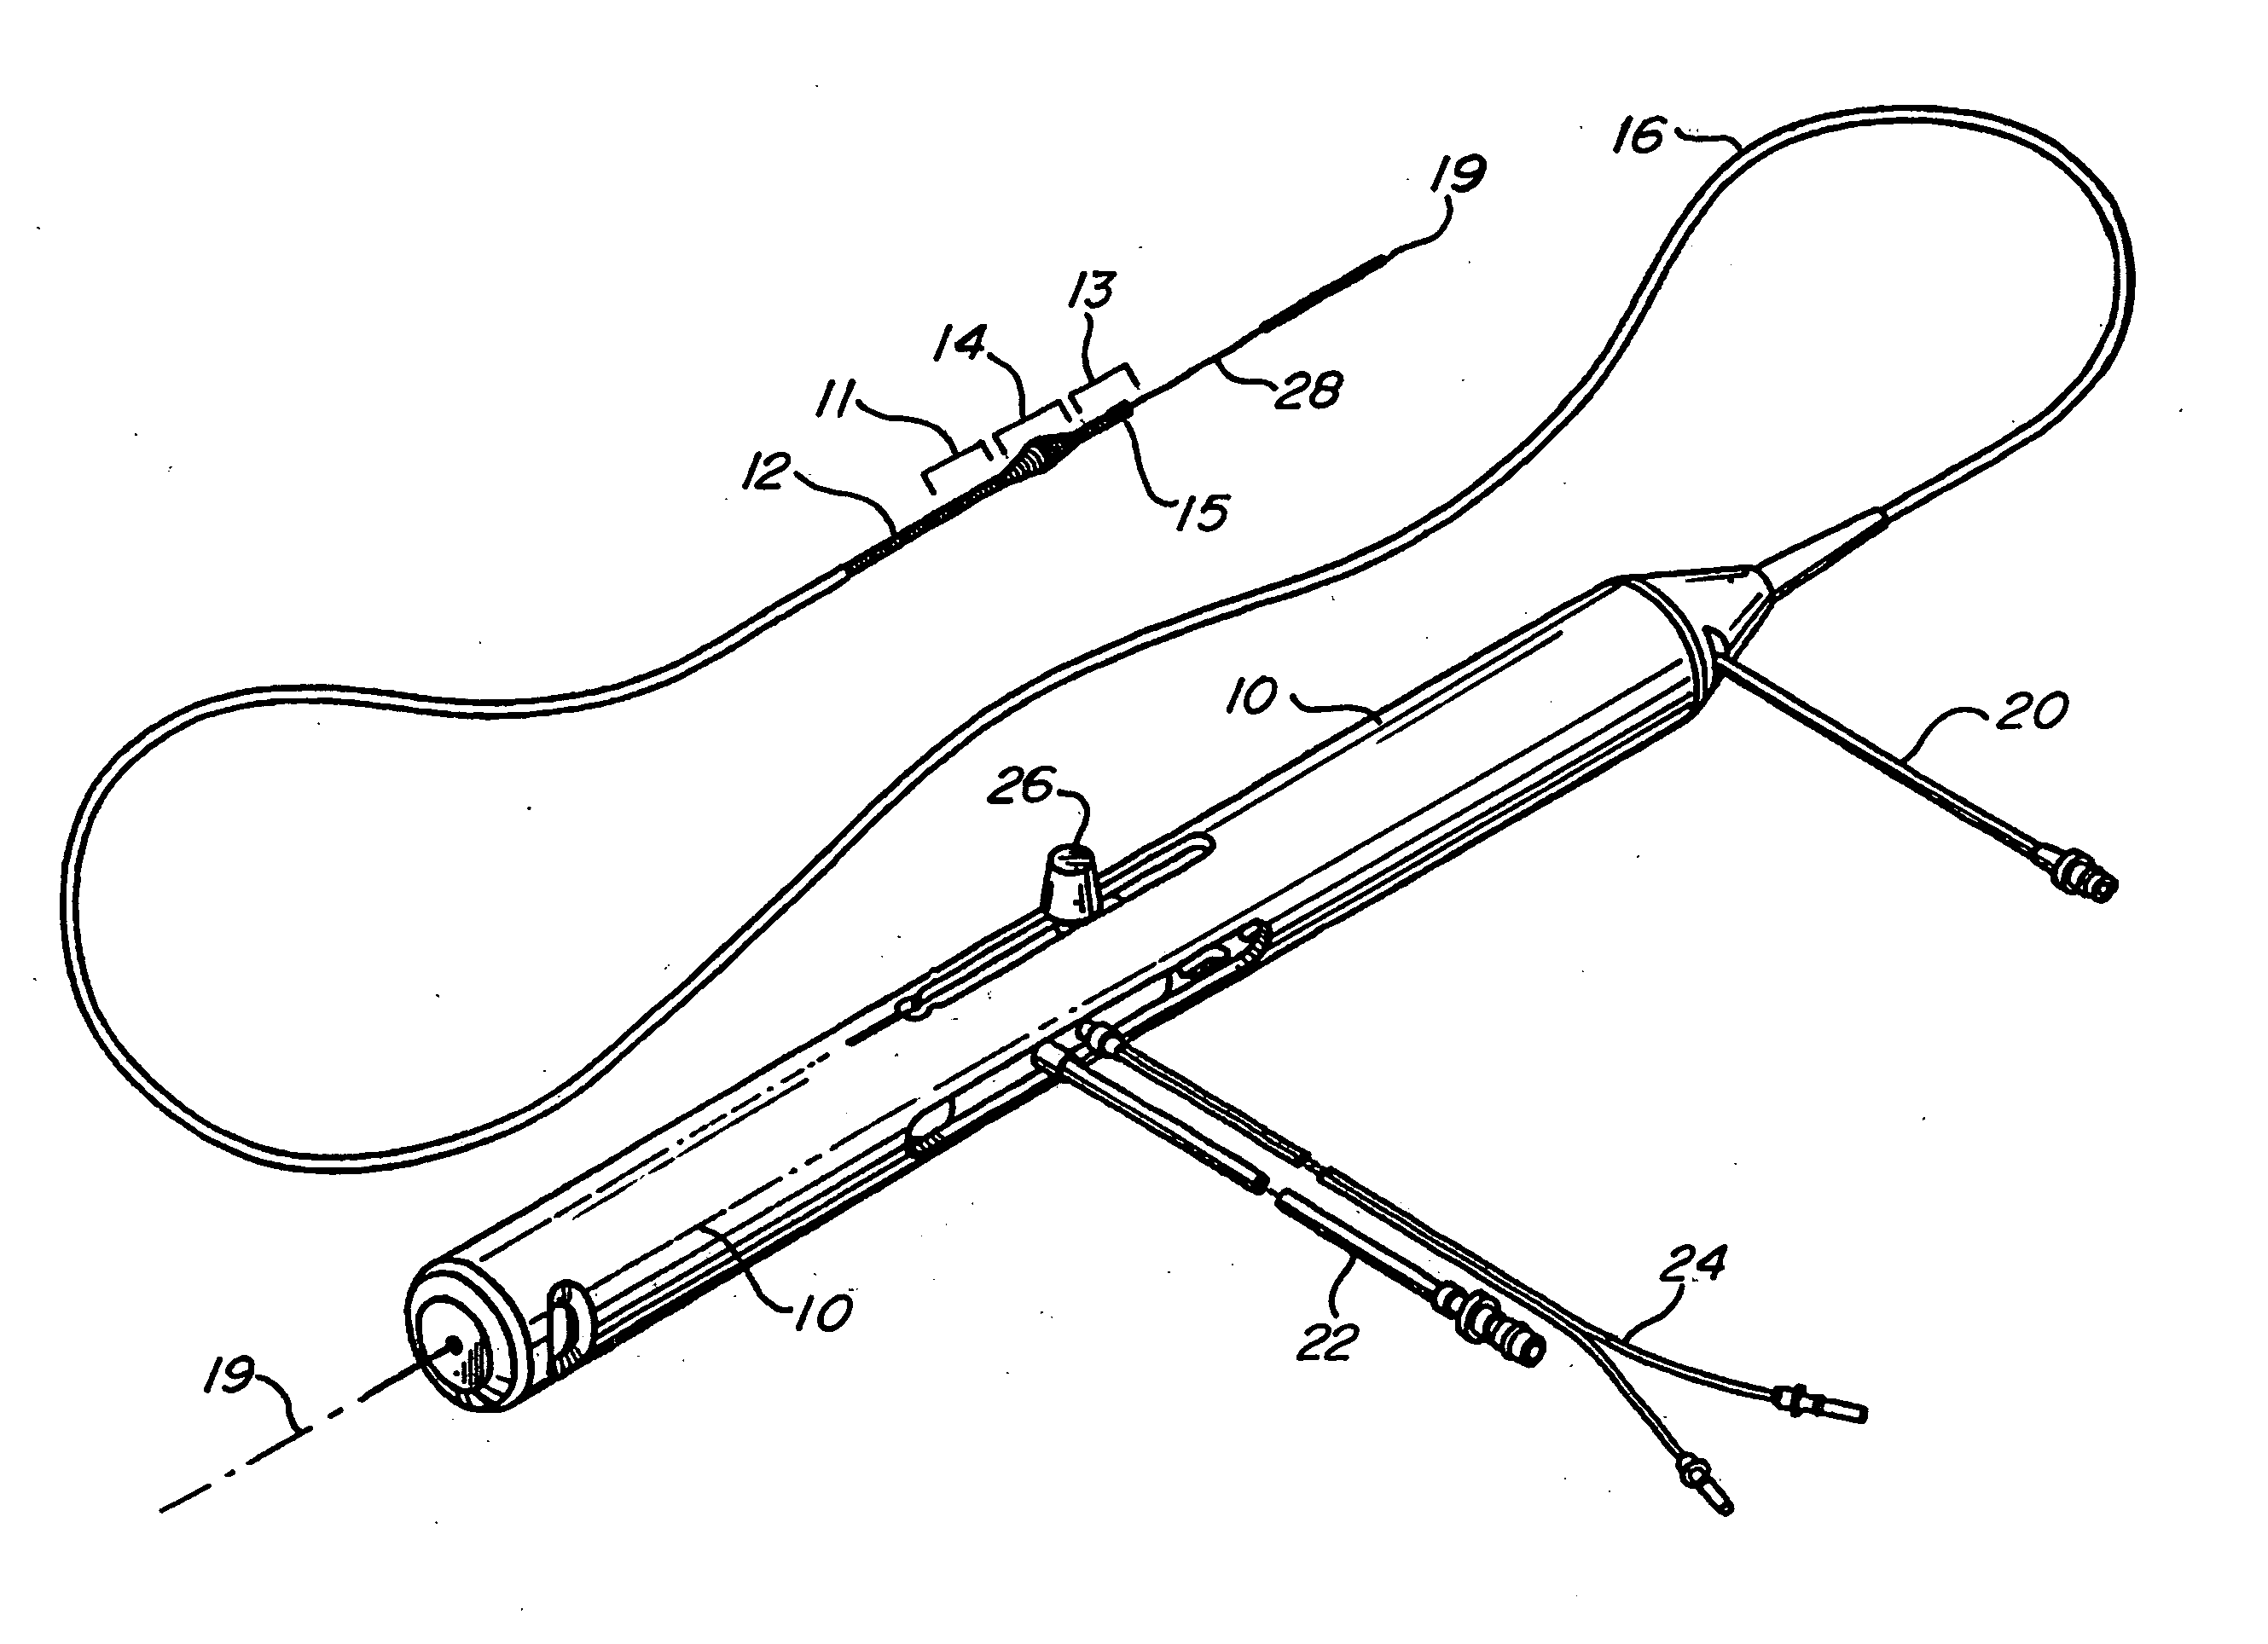 Terminal guide for rotational atherectomy device and method of using same